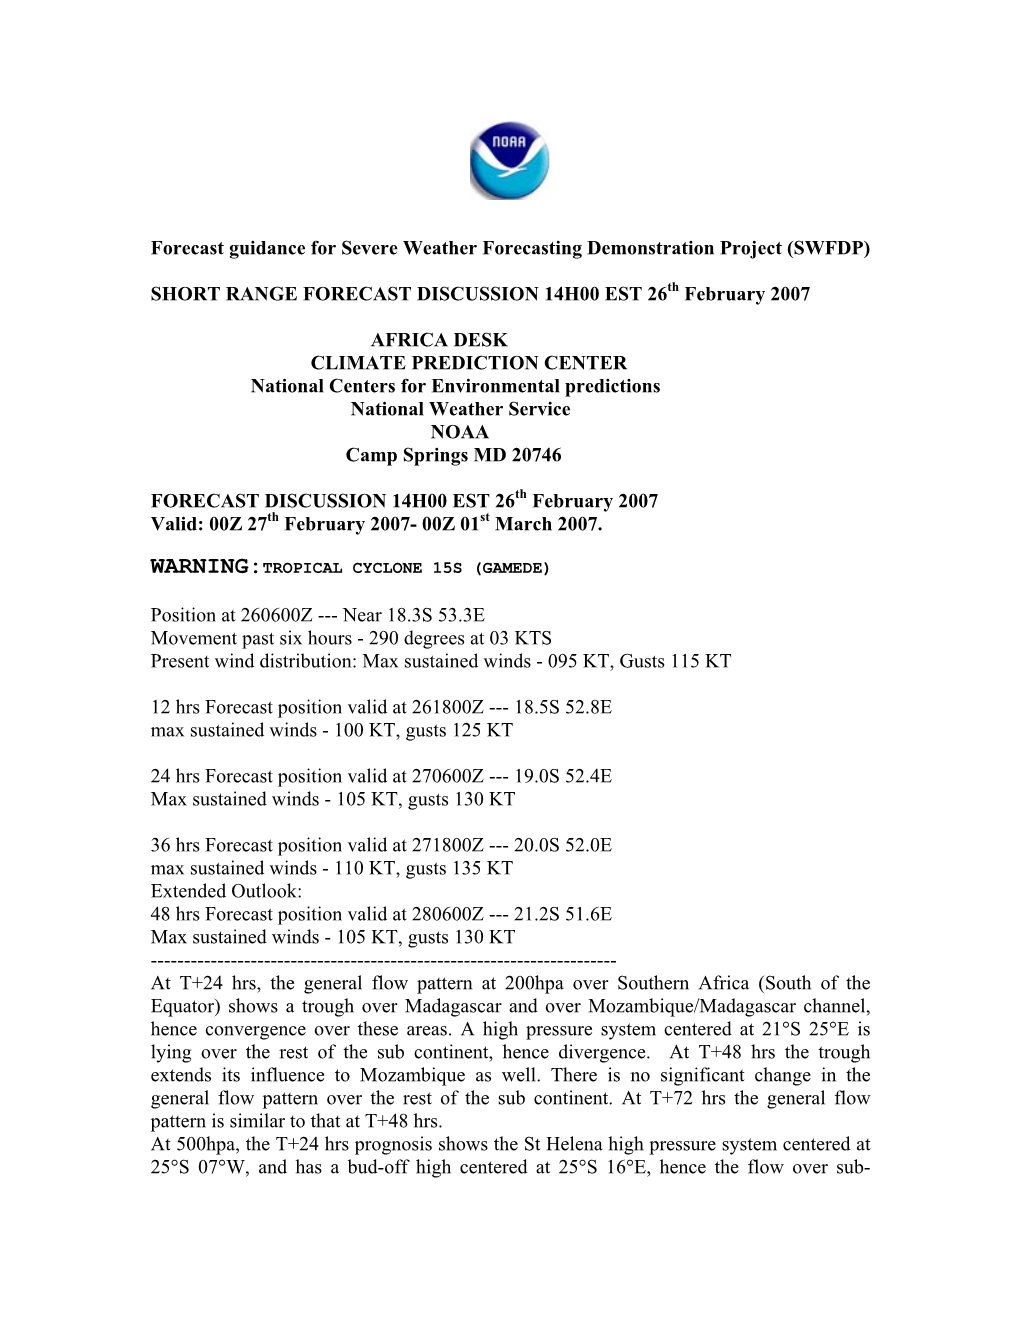 Forecast Guidance for Severe Weather Forecasting Demonstration Project (SWFDP)